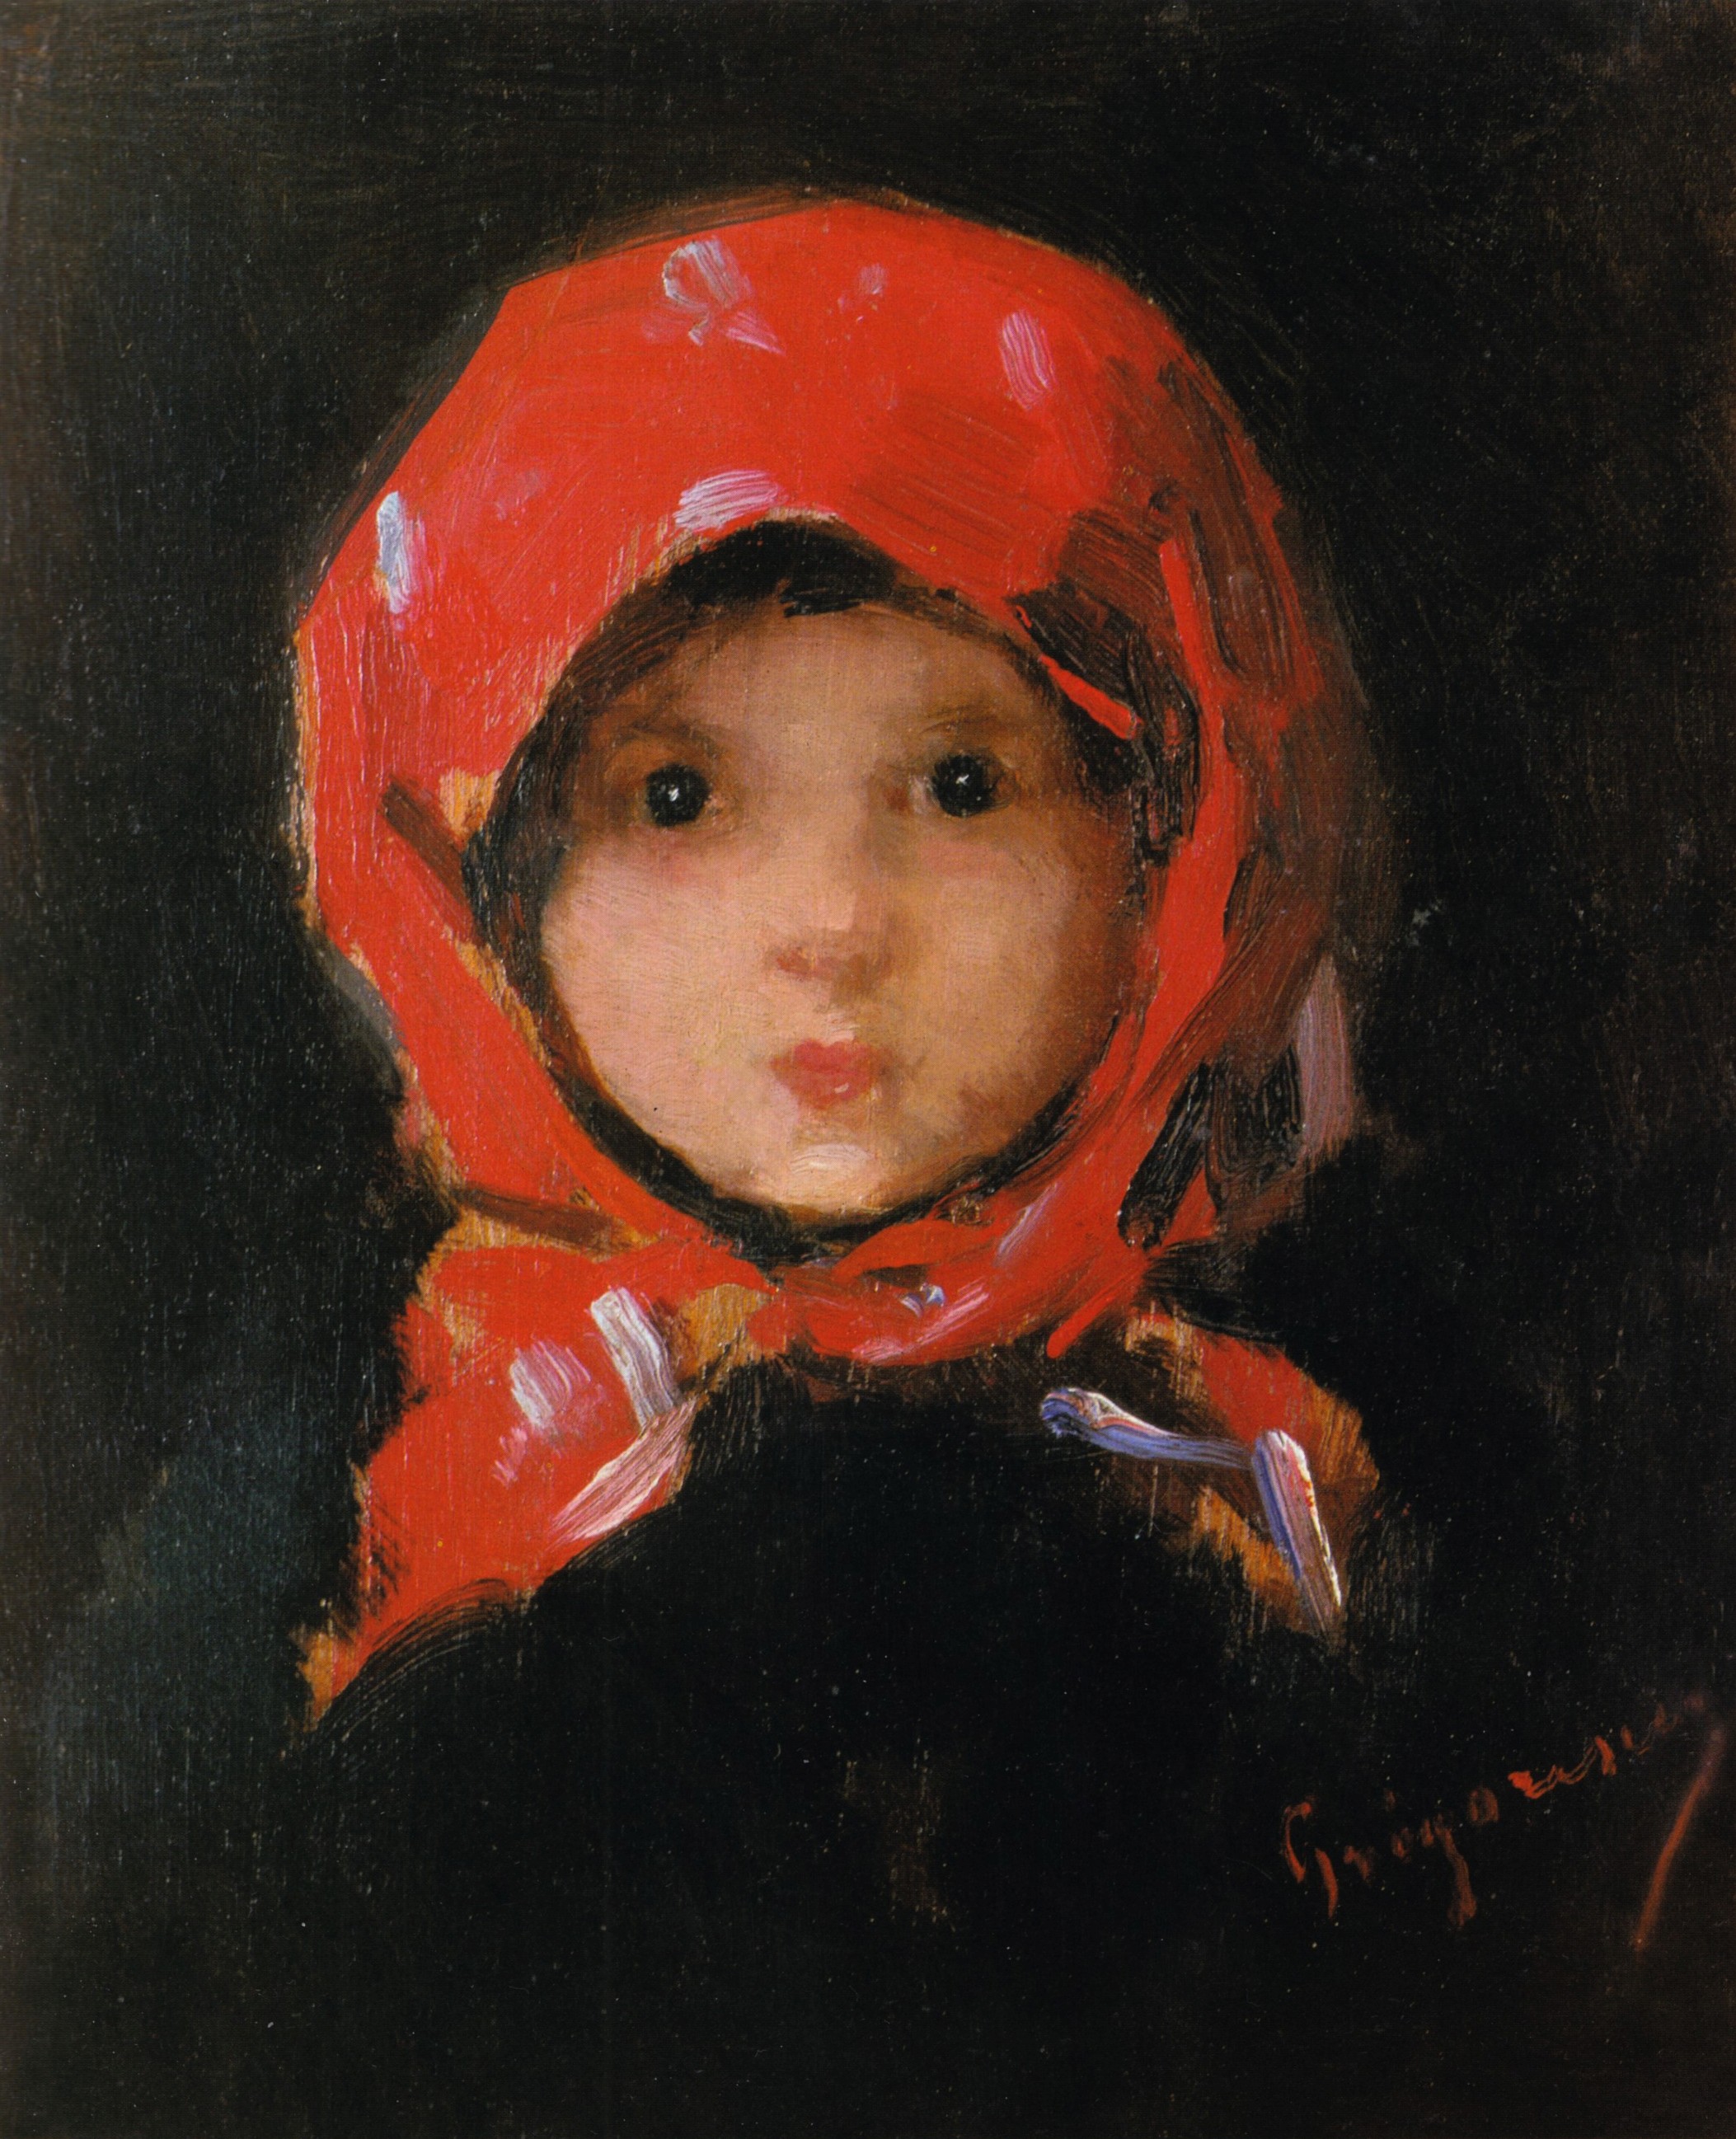 Inspiration: “The Little Girl With Red Headscarf” by Nicolae Grigorescu